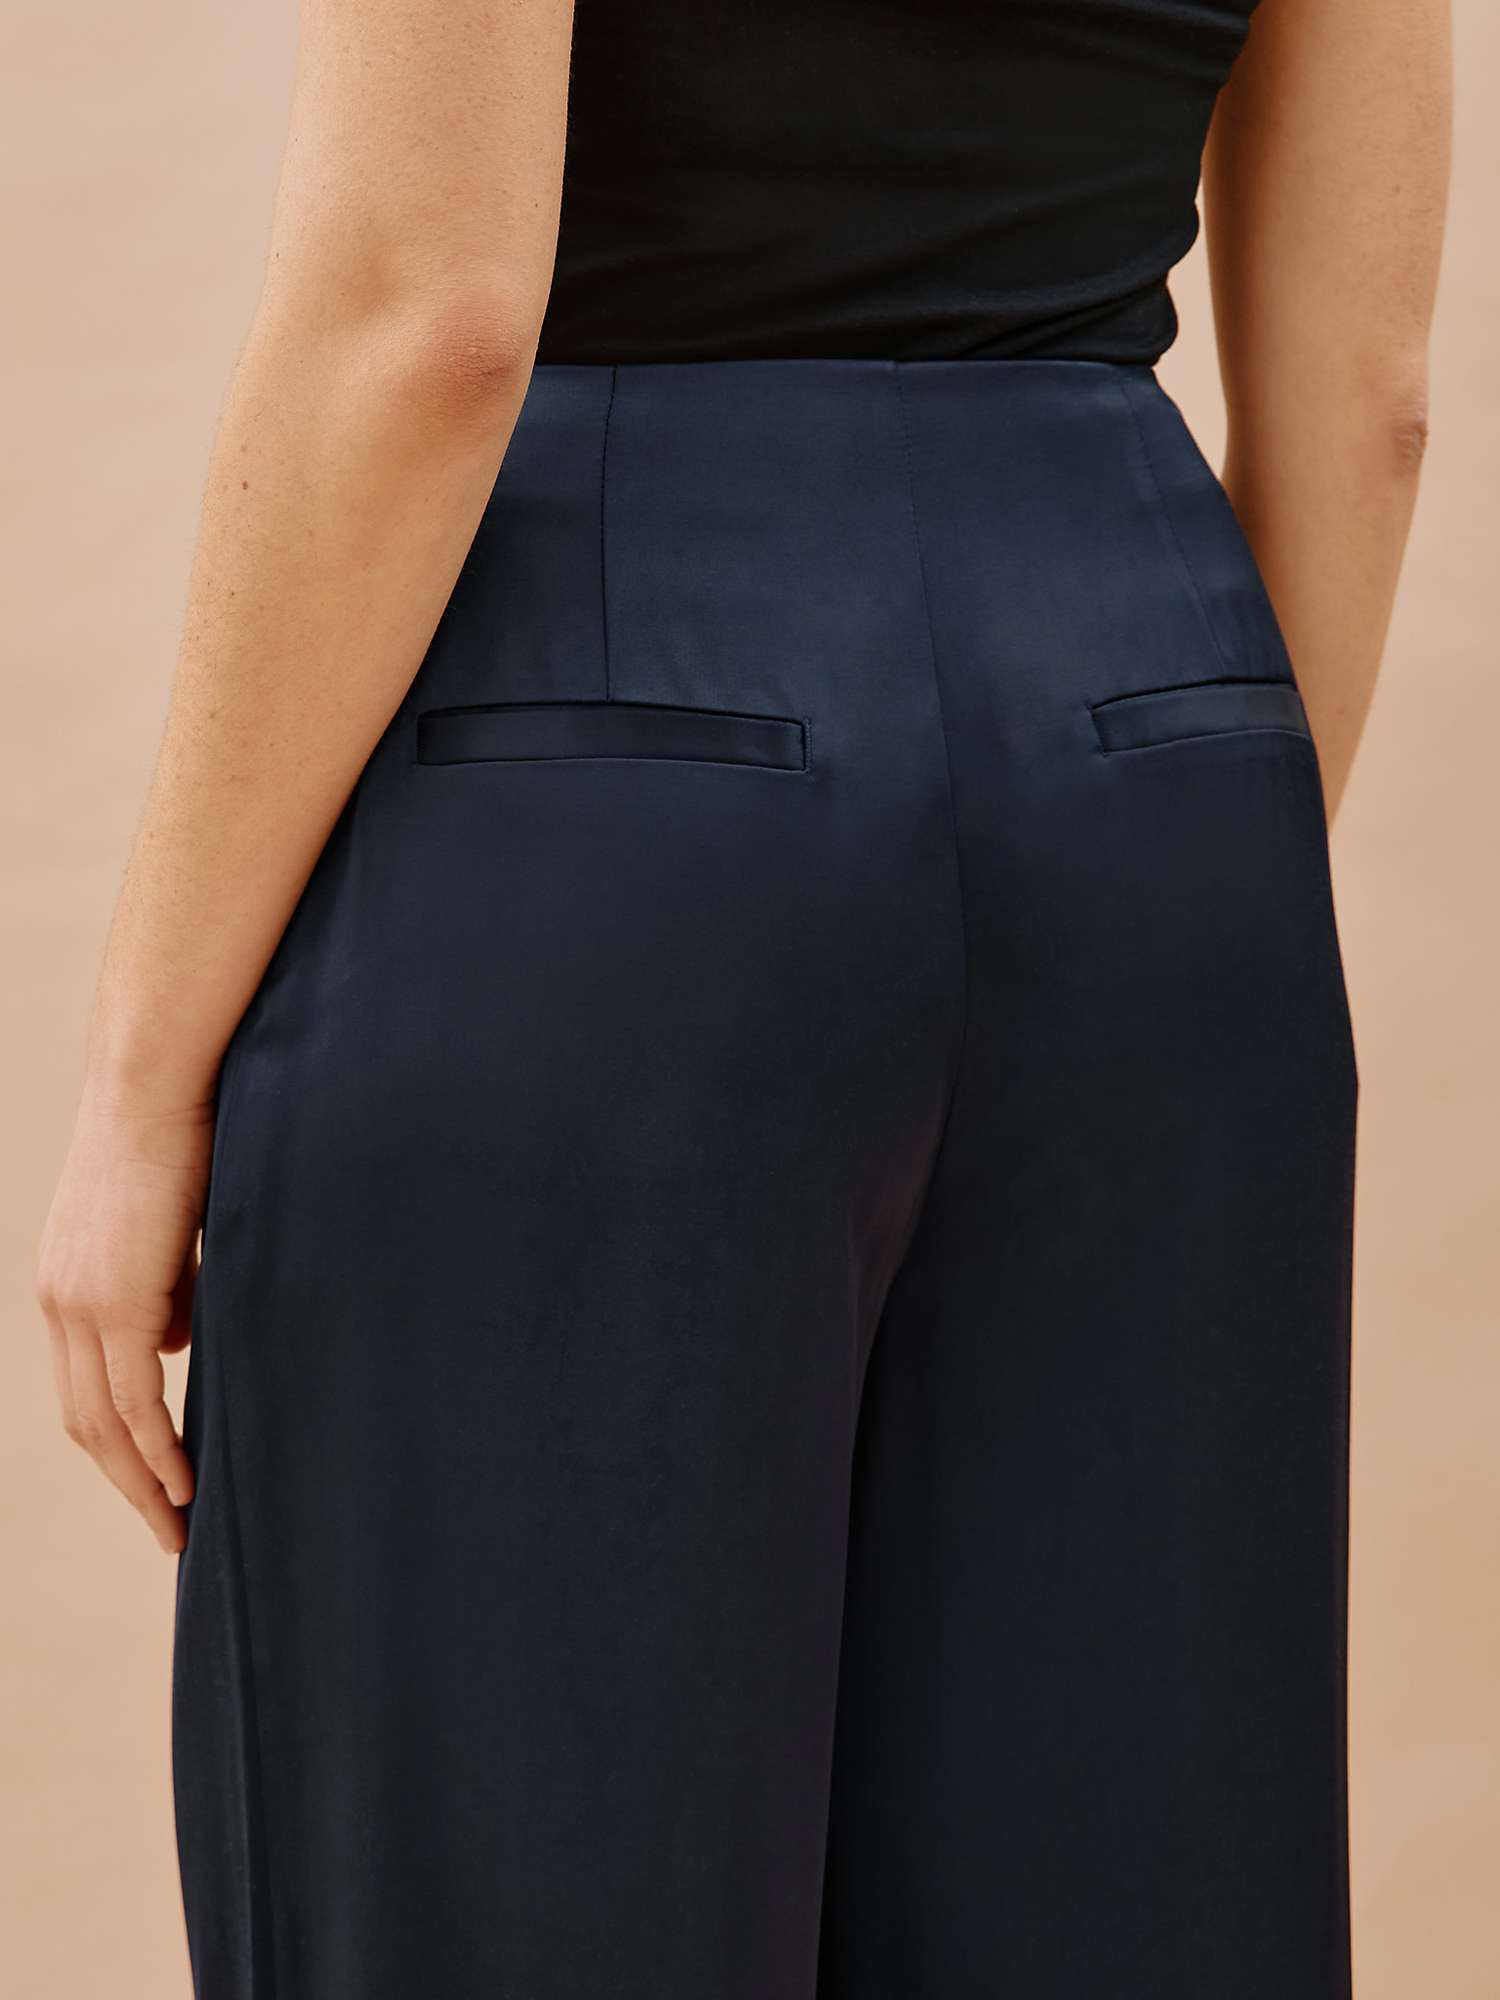 Buy Albaray Satin Wide Leg Trousers, Navy Online at johnlewis.com